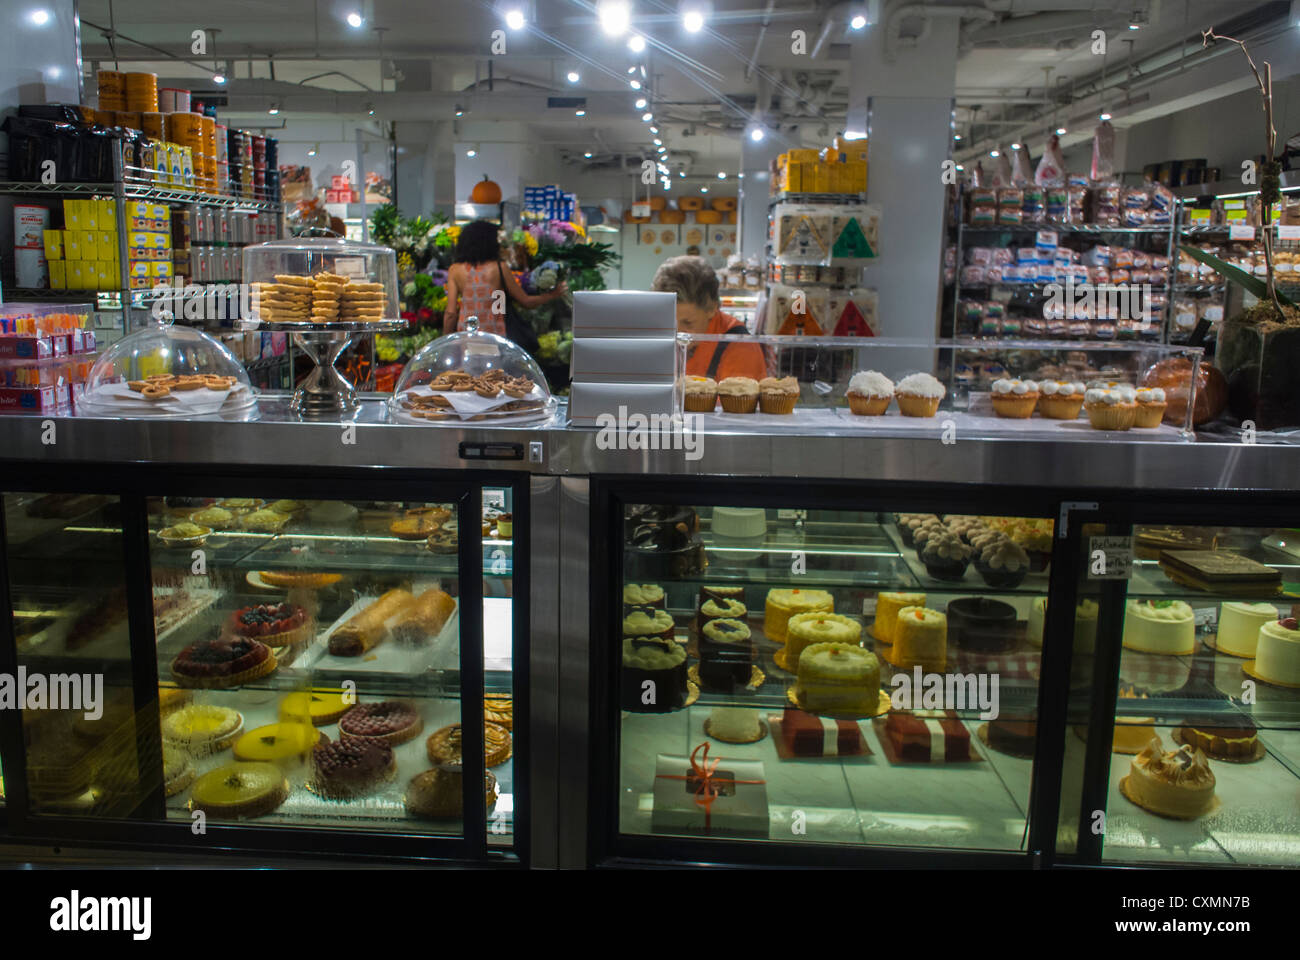 New York, NY, USA, Gourmet Food Grocery , American Bakery, Cakes bakery shelves display, Shopping in Greenwich Village, Citarella Store Stock Photo